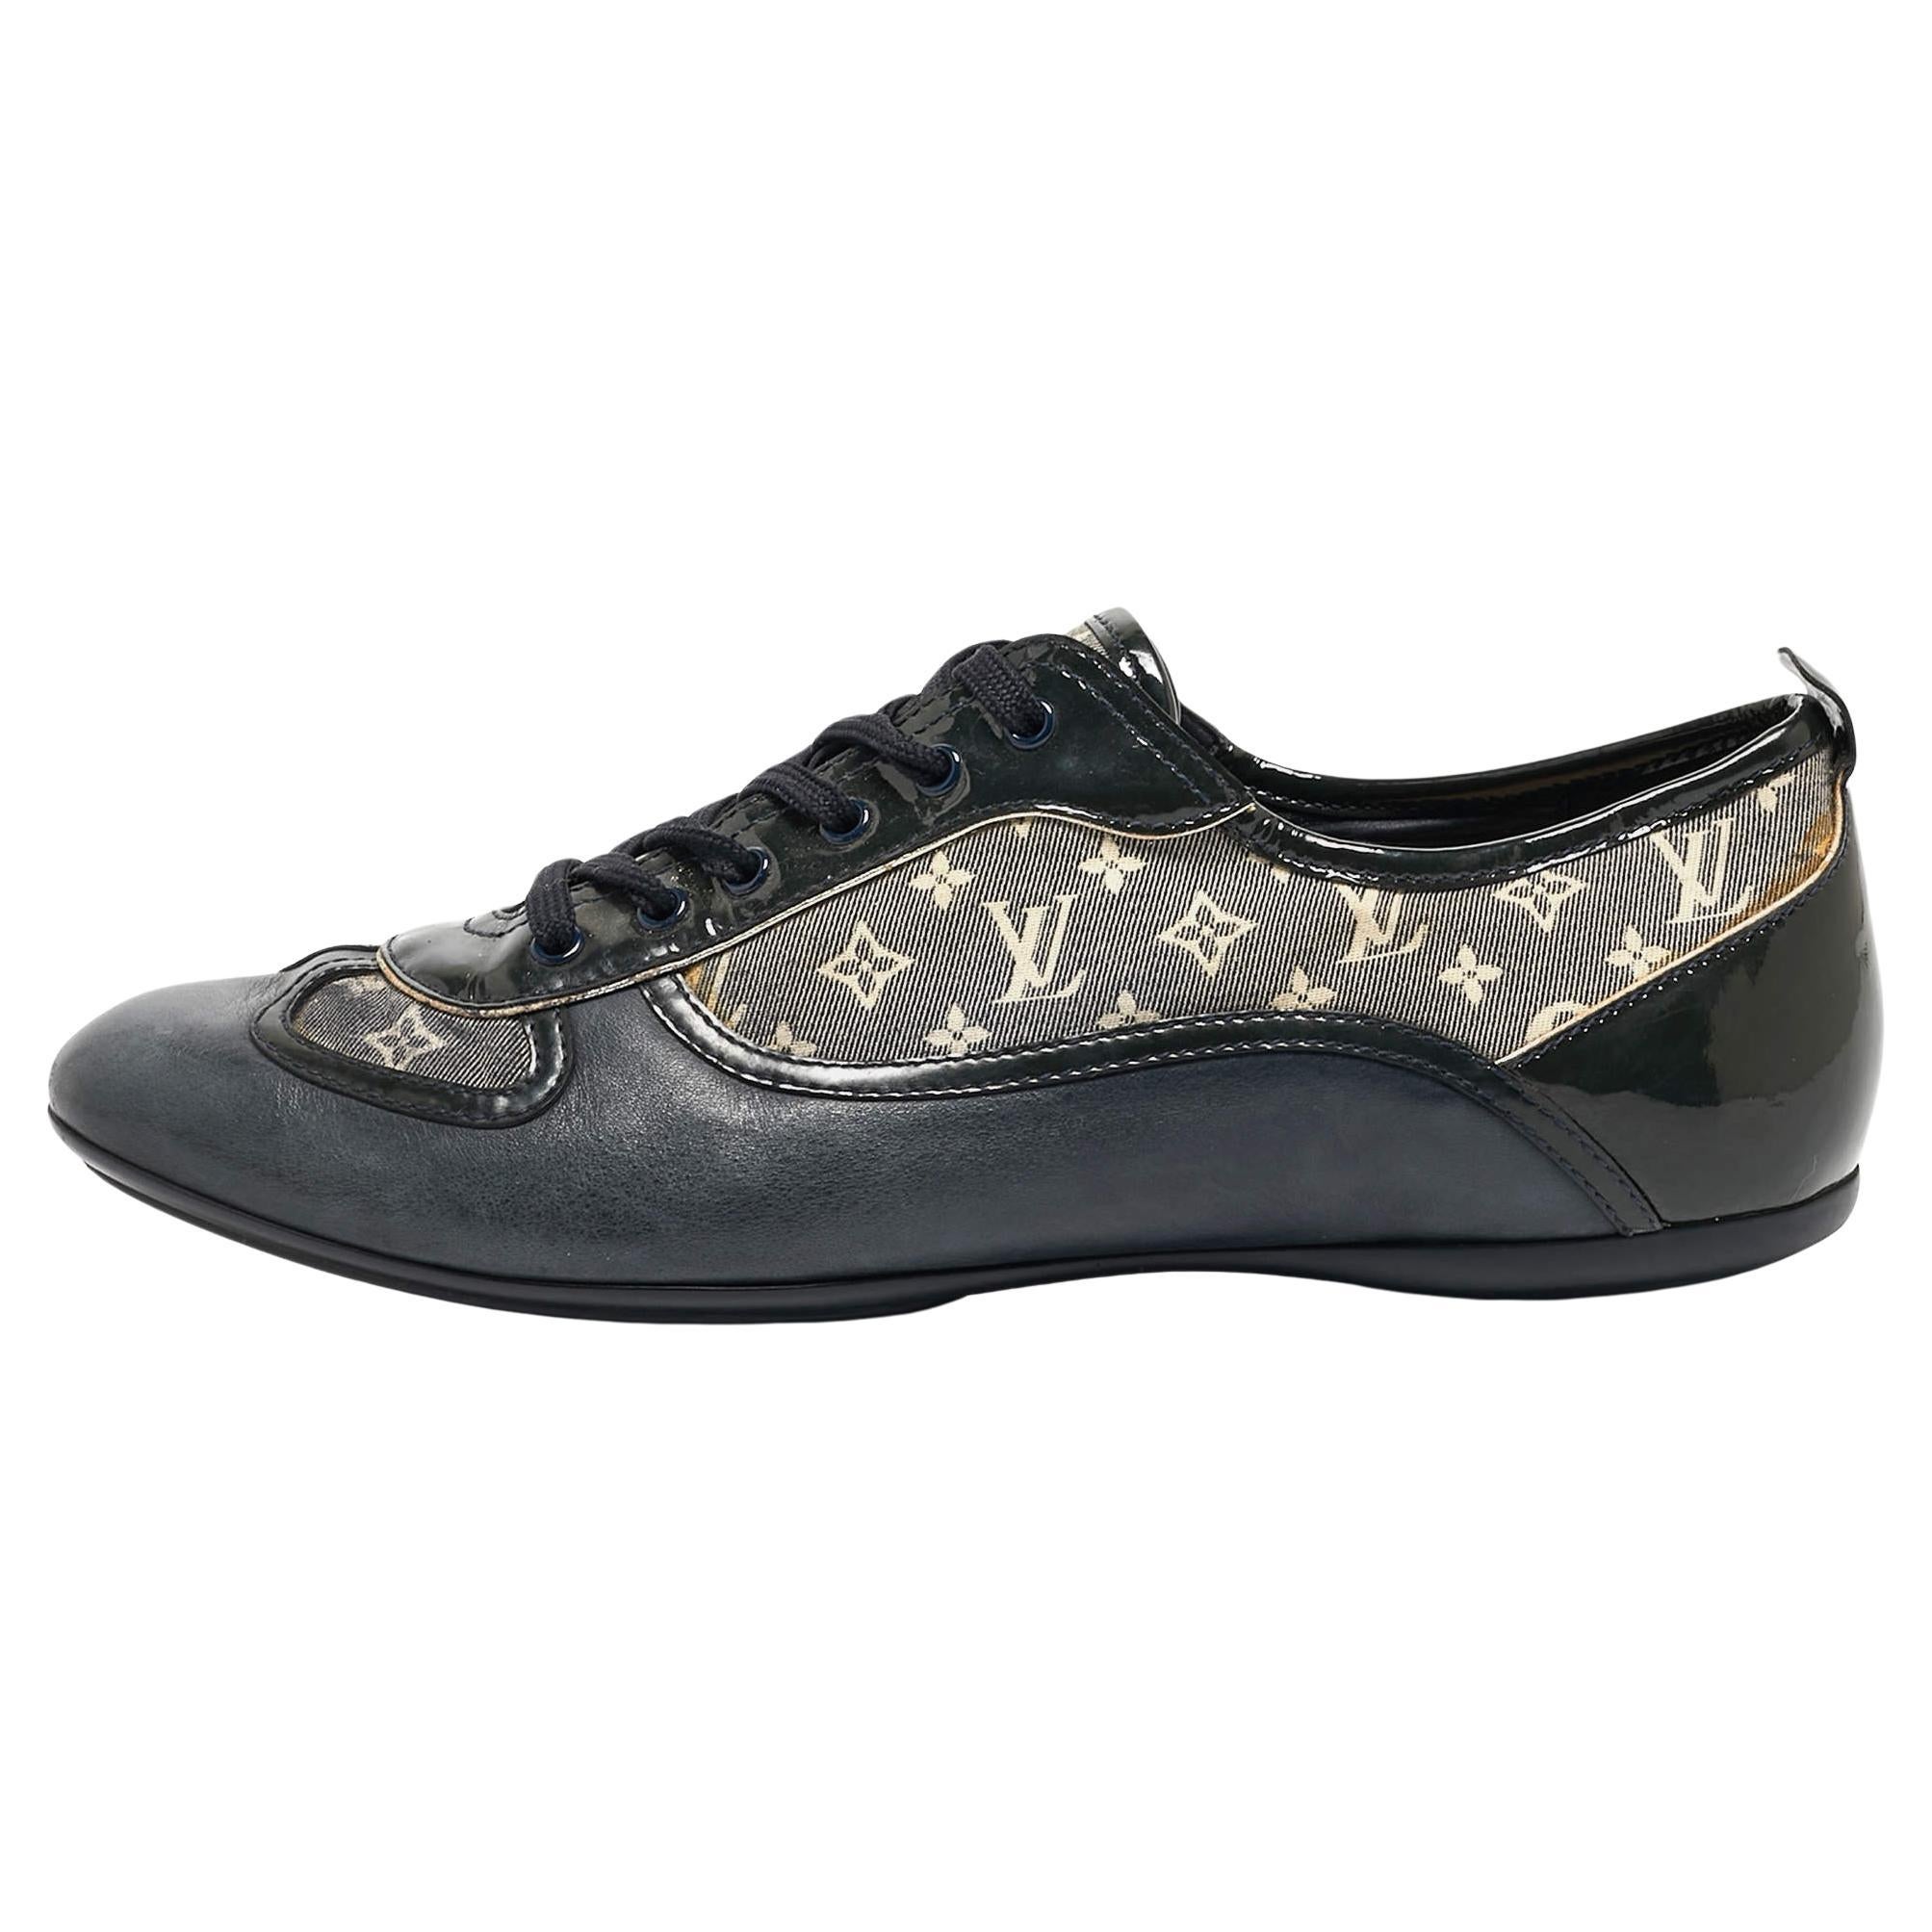 Louis Vuitton Tricolor Leather and Monogram Canvas Low Top Sneakers Size 37 For Sale